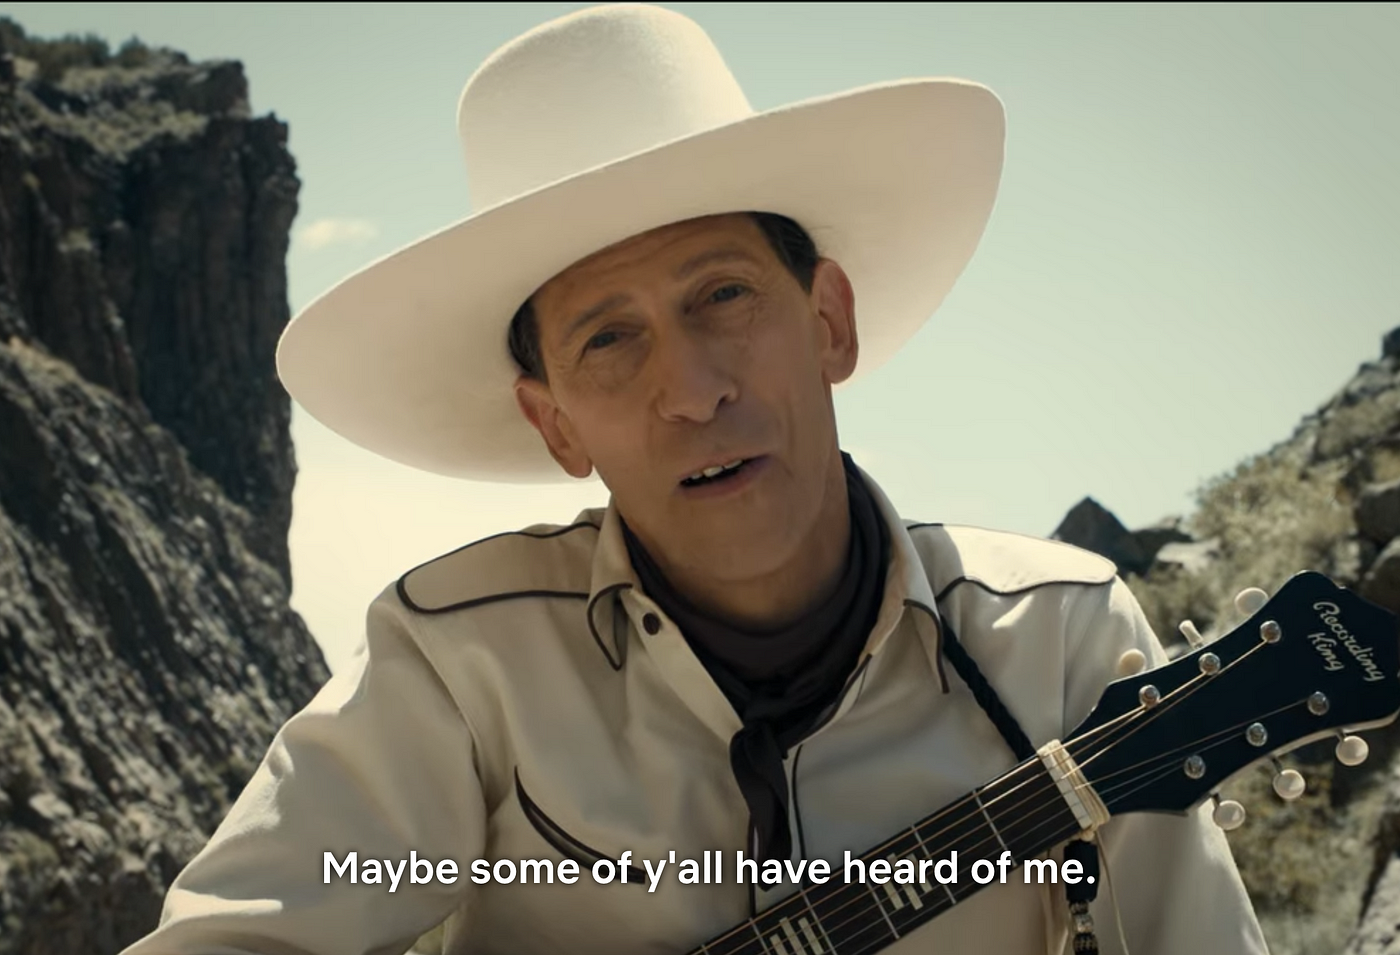 The Ballad of Buster Scruggs: How the West Wove Violence into the